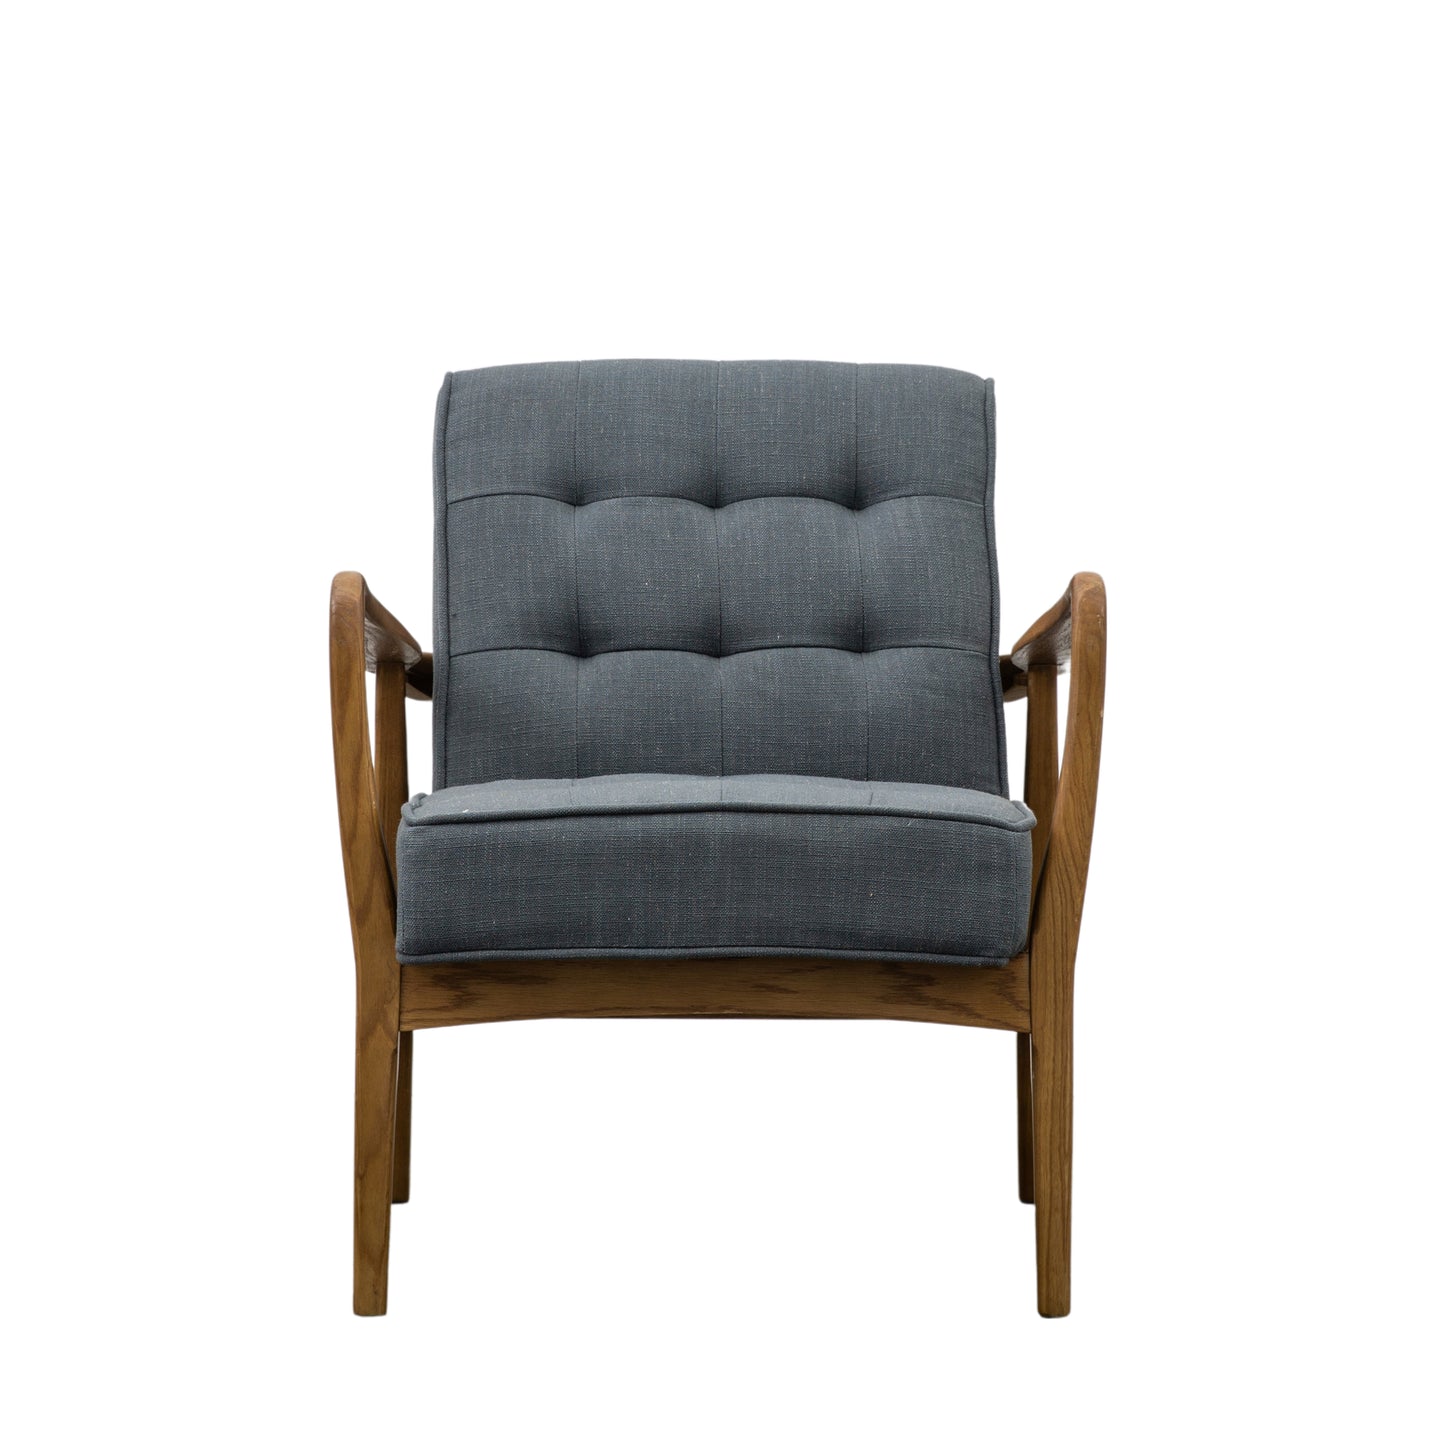 A Dark Grey Linen Camber Armchair with wooden legs for home furniture and interior decor from Kikiathome.co.uk.